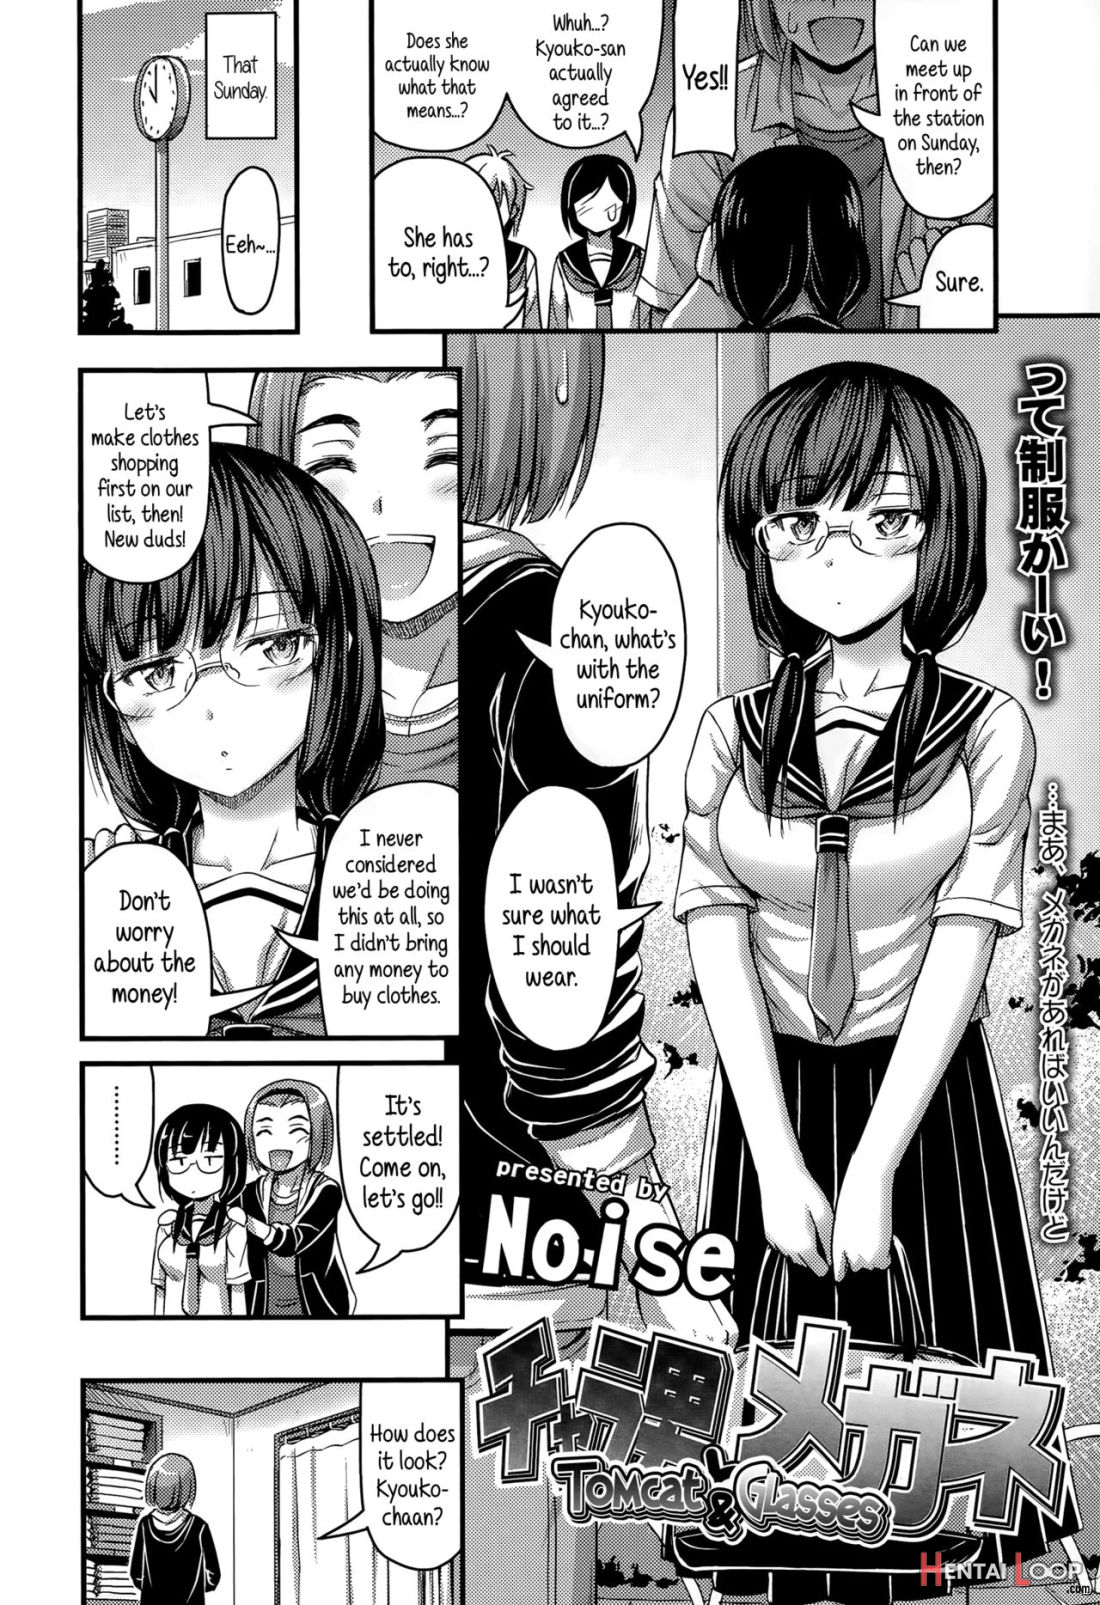 Charao To Megane page 2